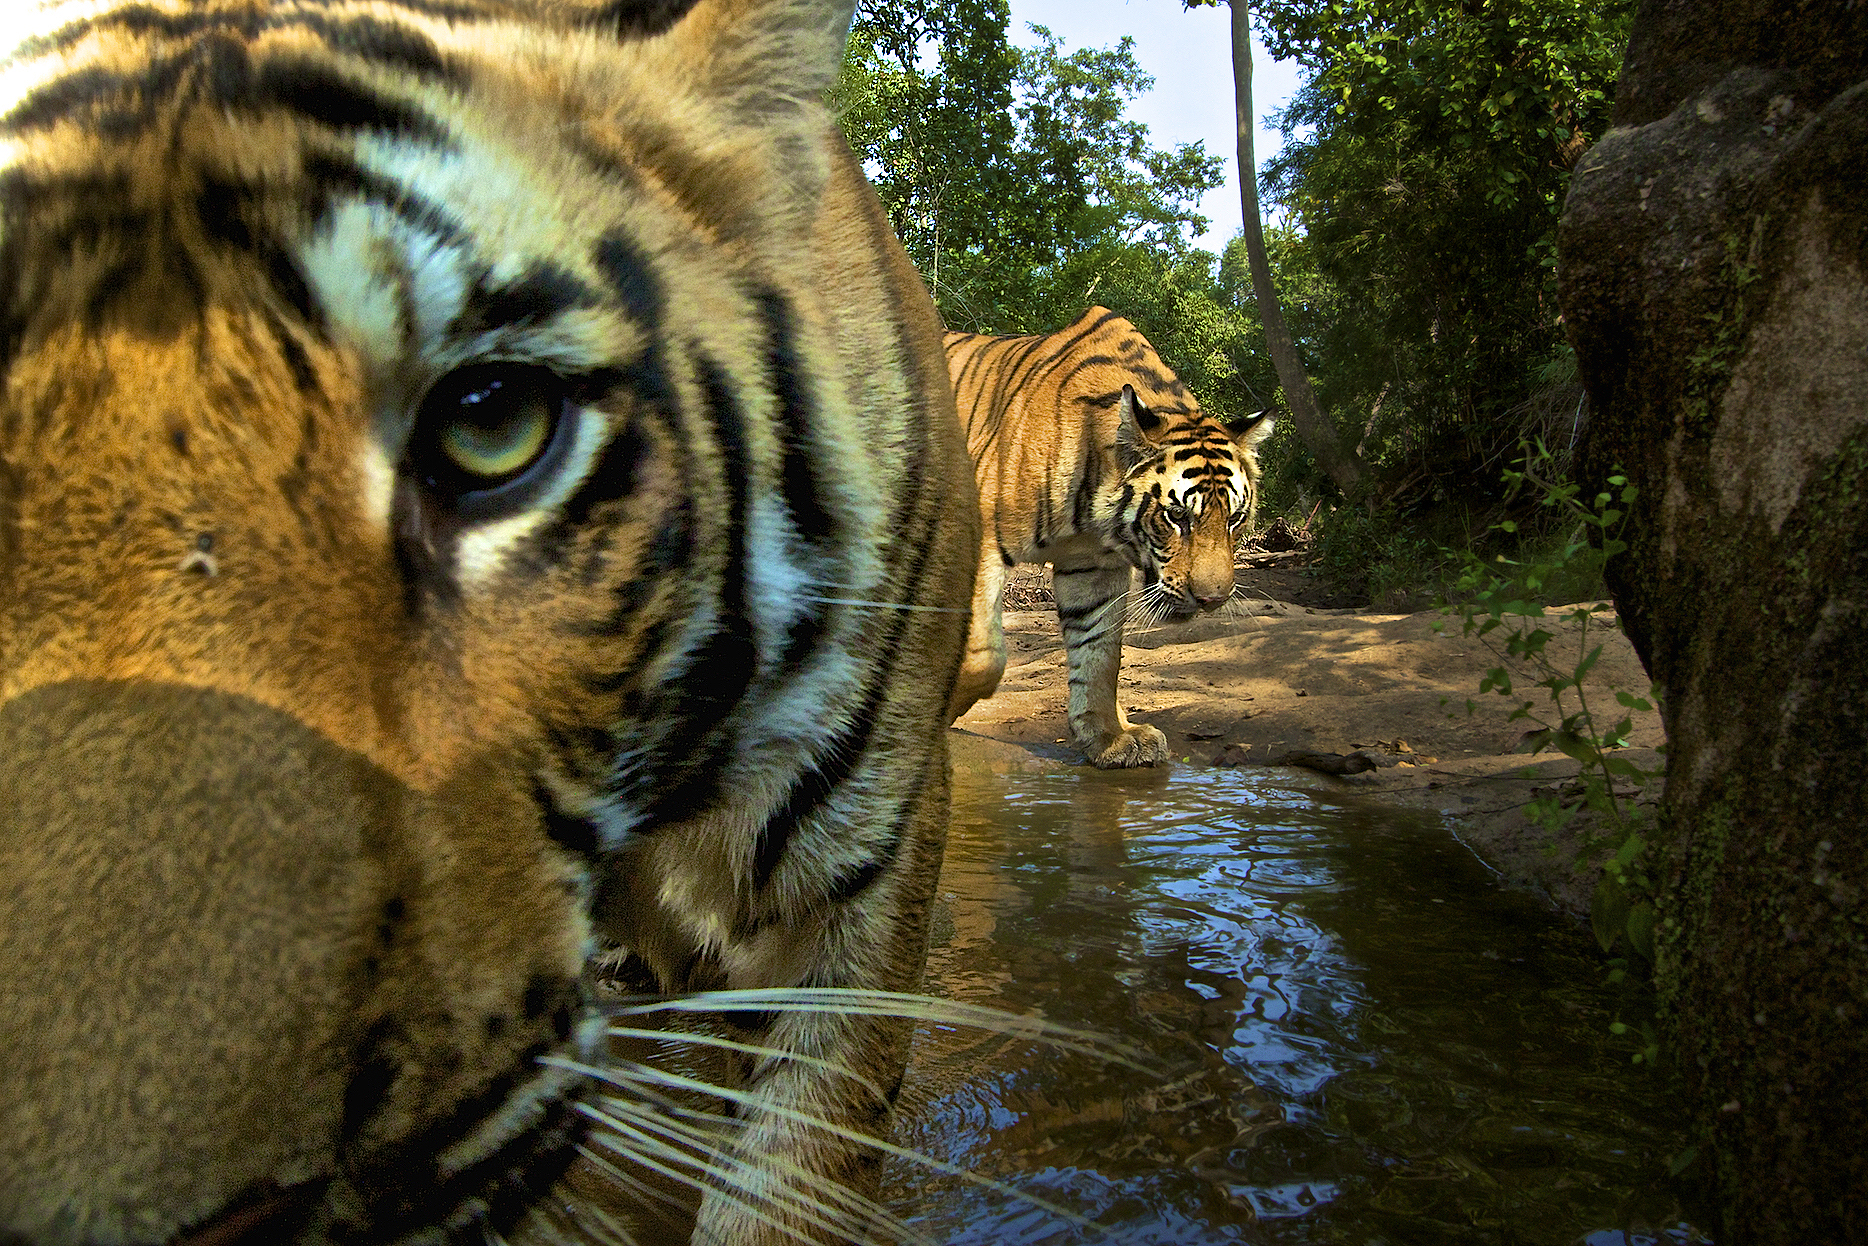 Tigers and Wild Cats for Sale in Myanmar: A Tale of Two Border Towns ...